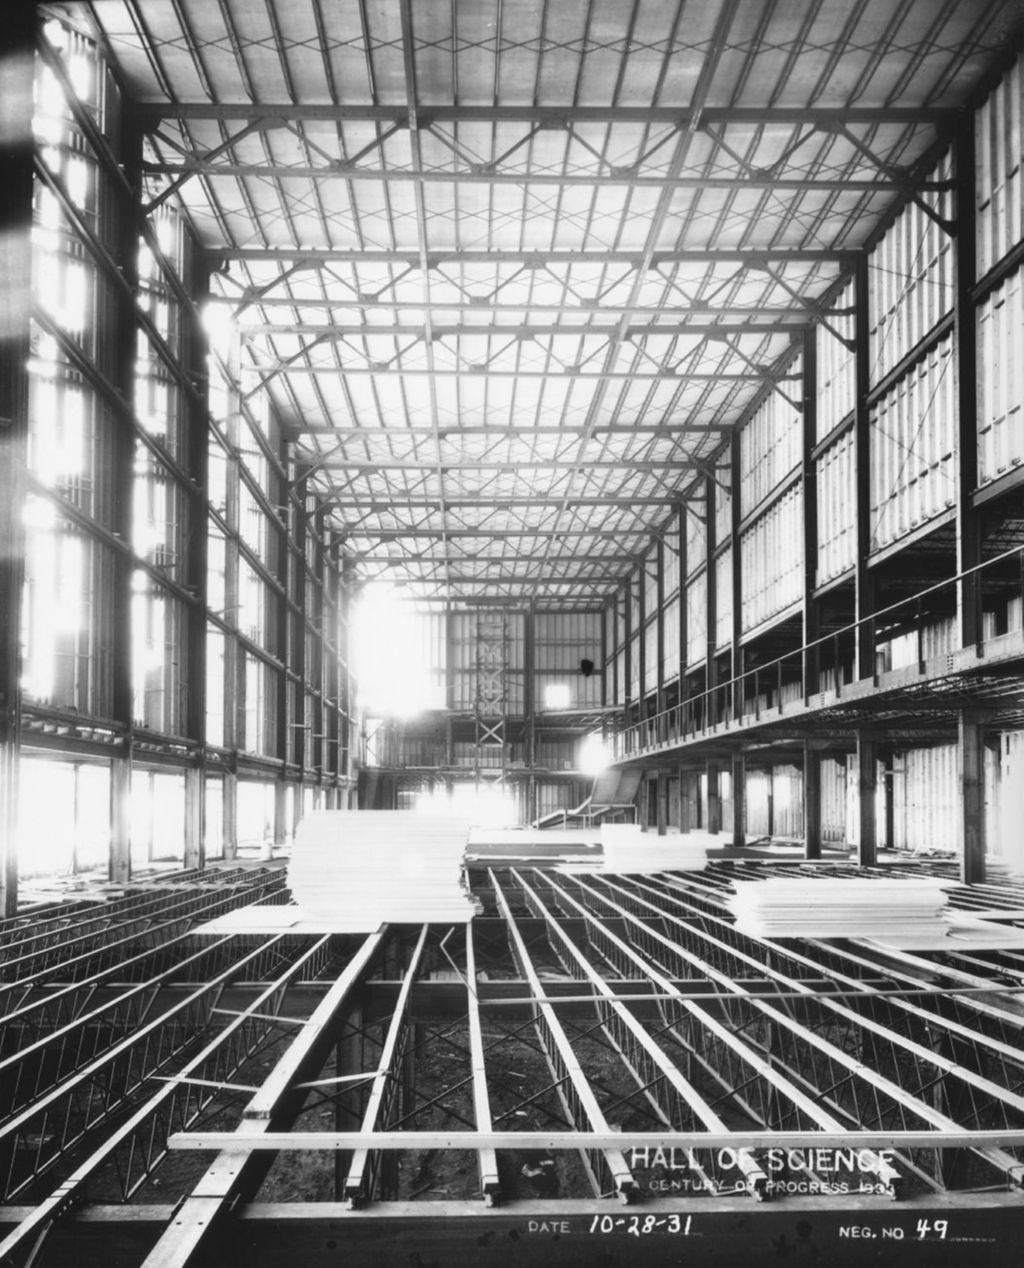 Miniature of Interior view of the Hall of Science under construction in preparation for A Century of Progress.